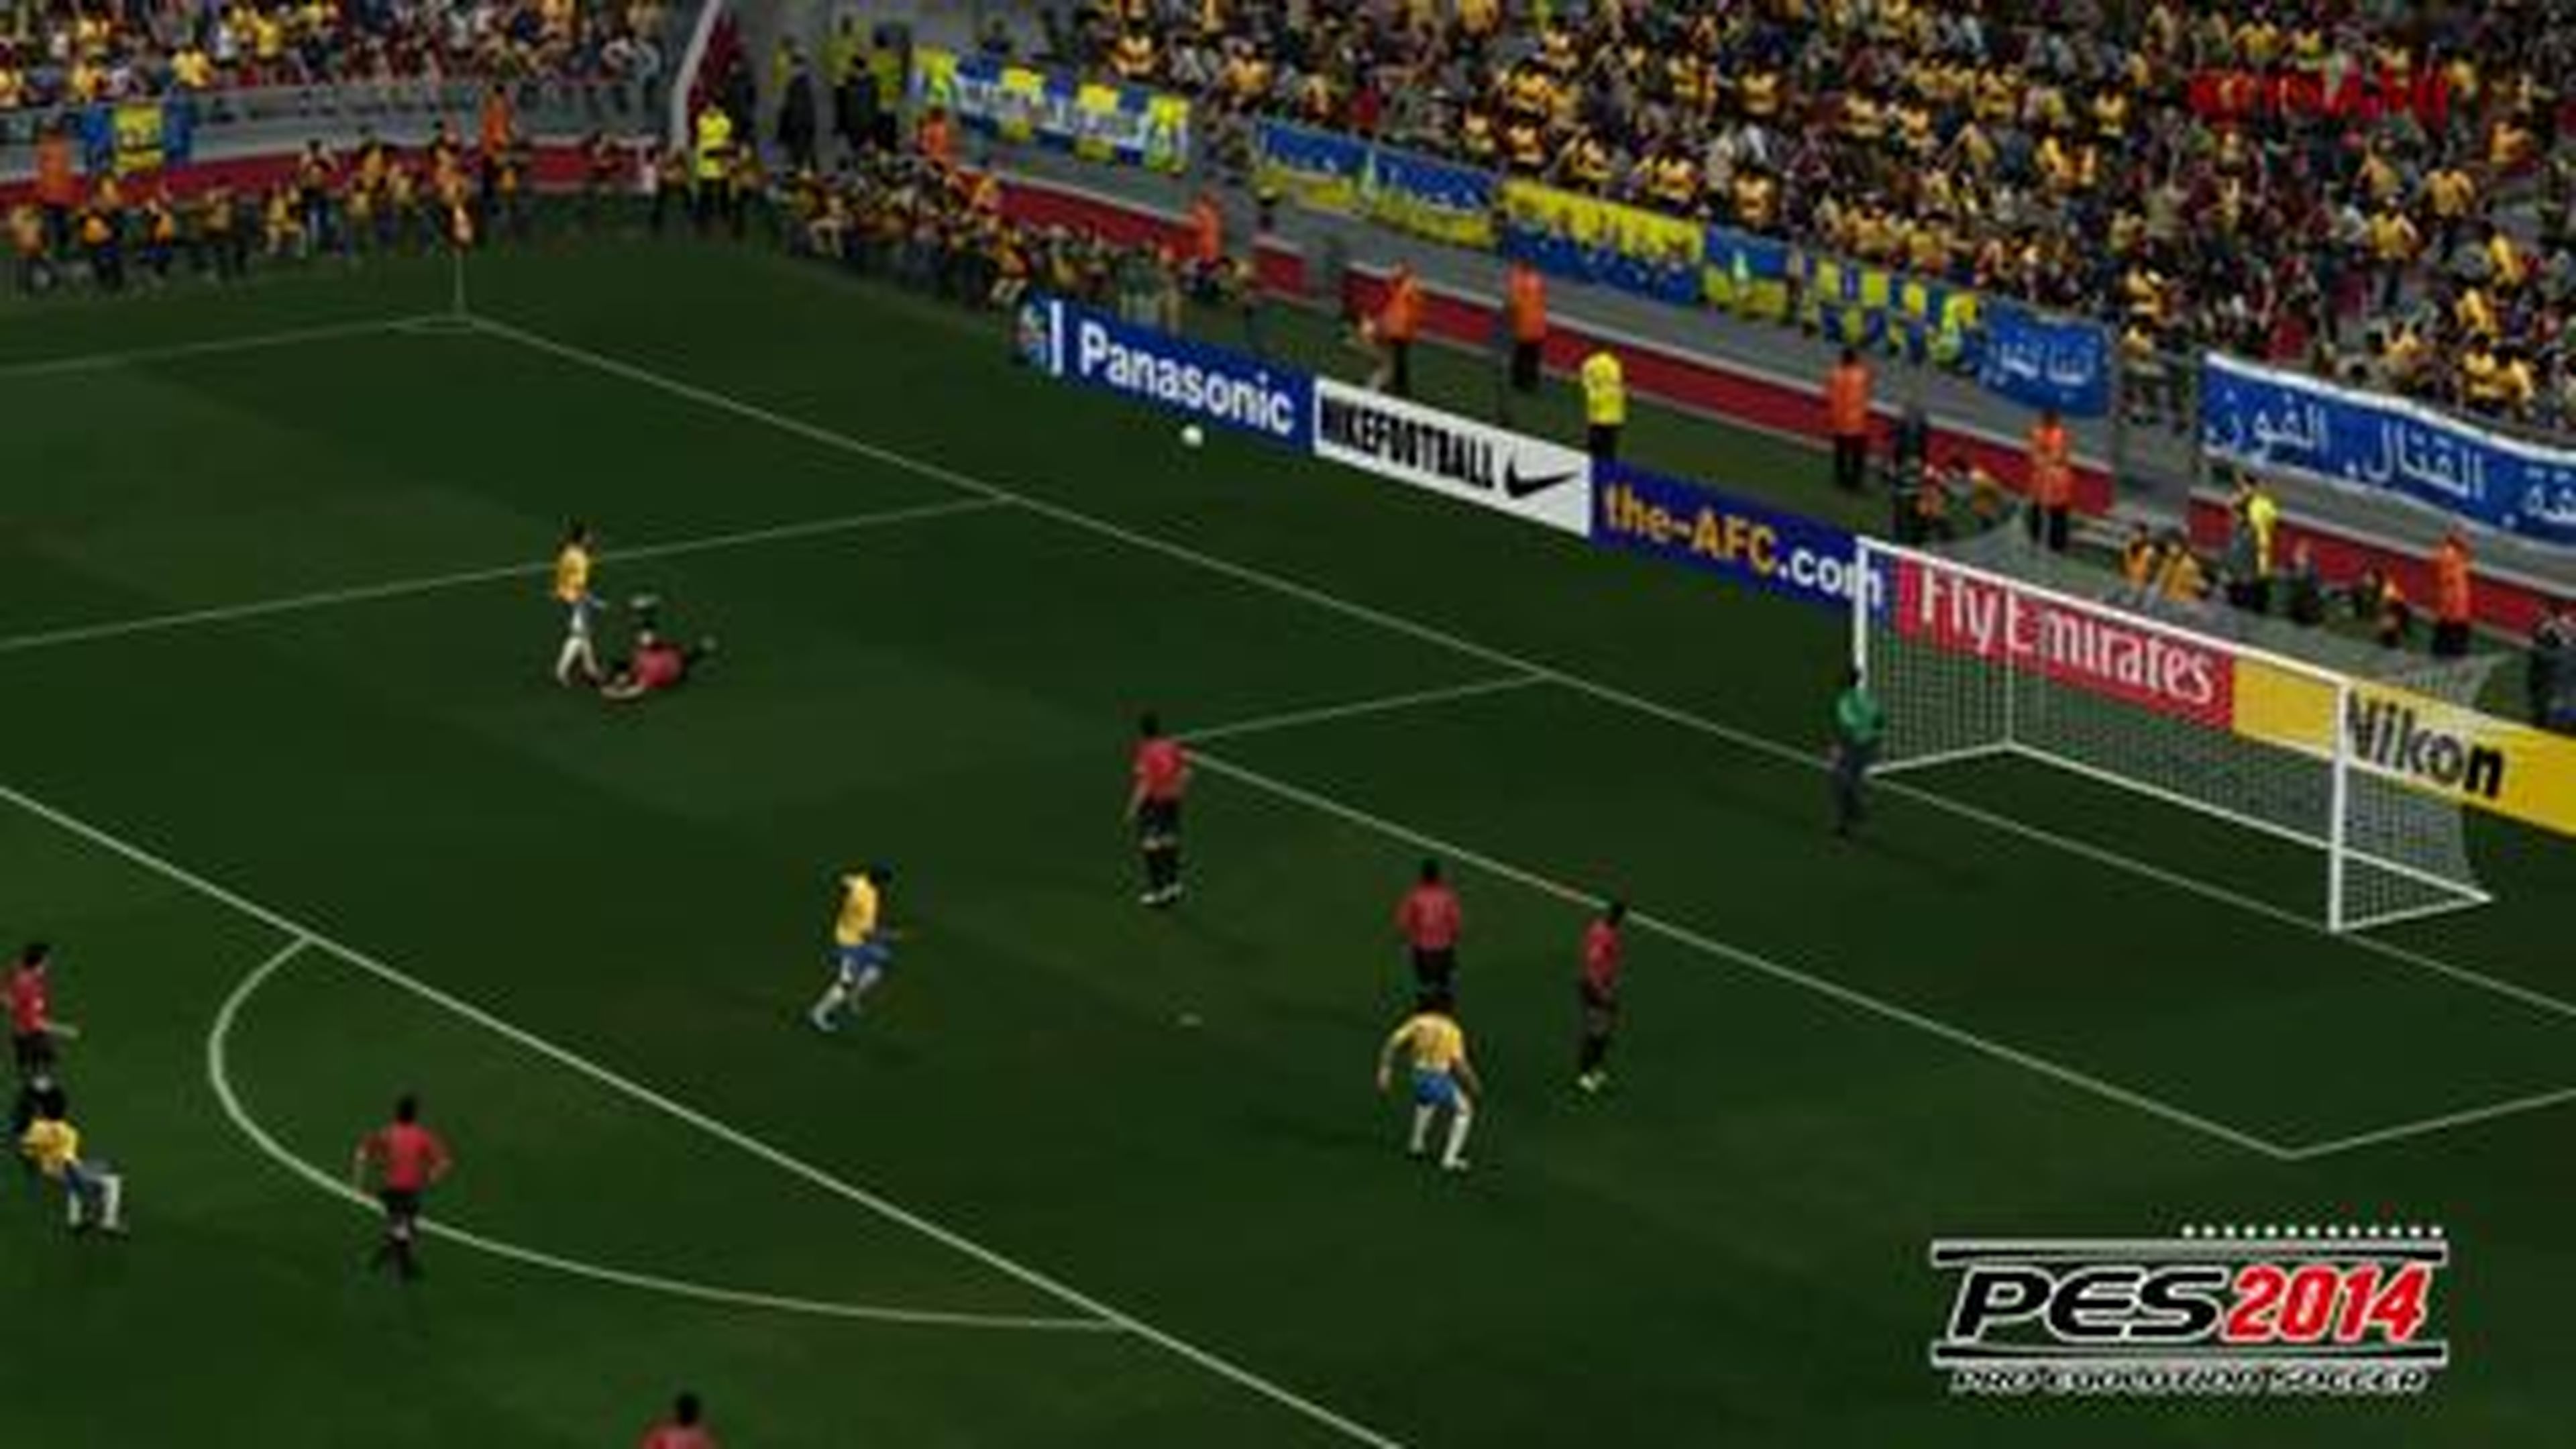 [New & Official] Data Pack 2 Trailer [PES 2014]